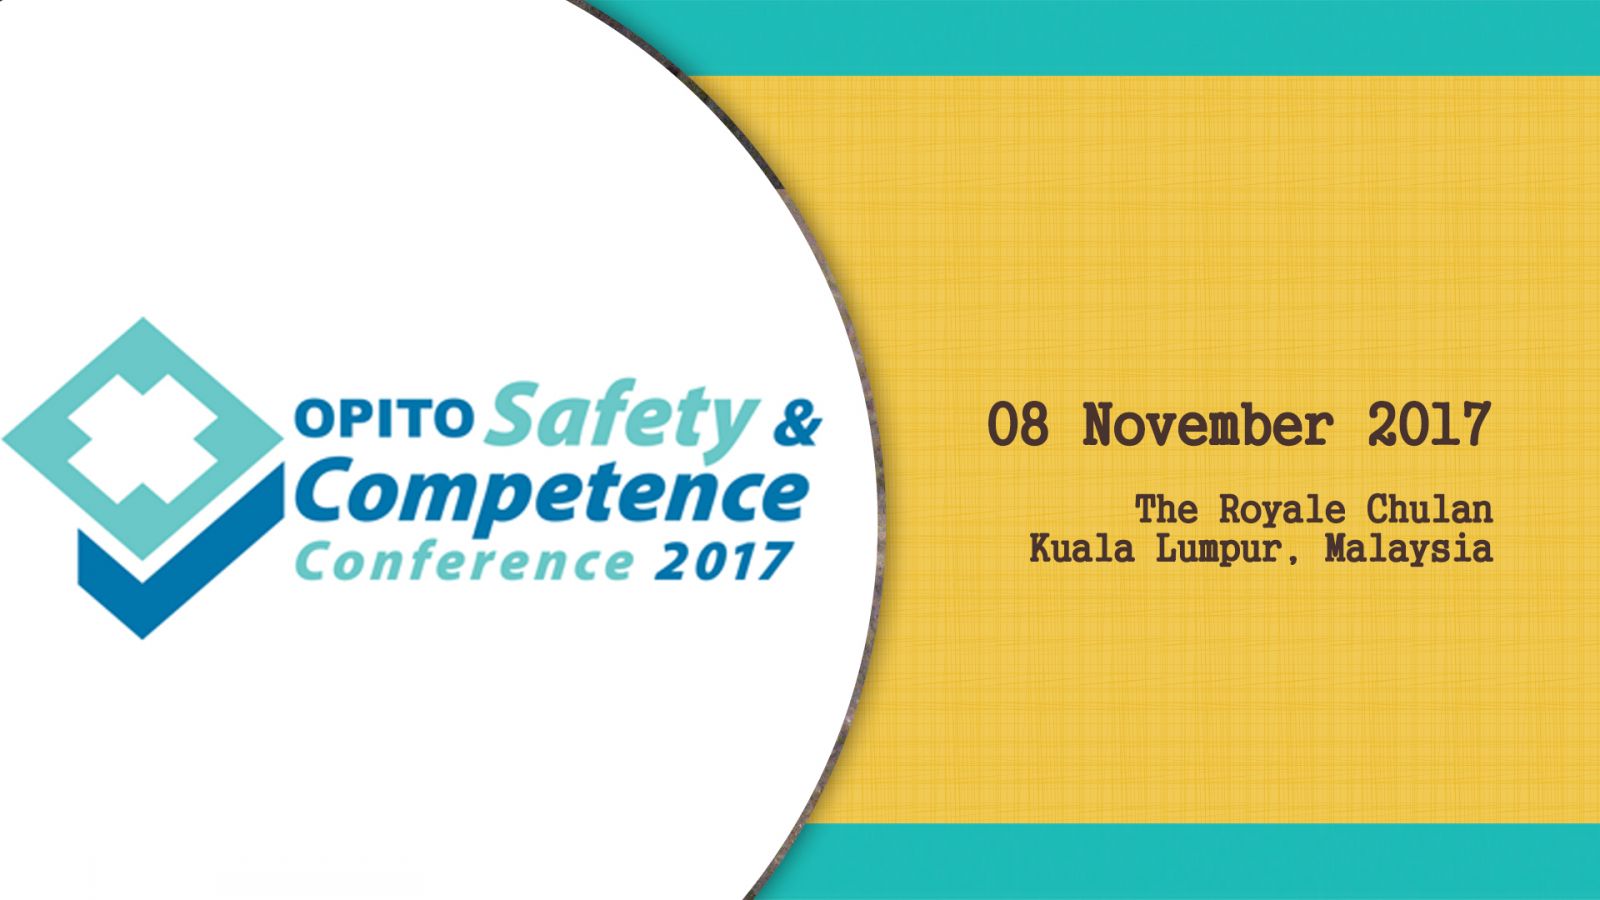 Visit KBAT at OPITO Safety & Competence Conference 2017